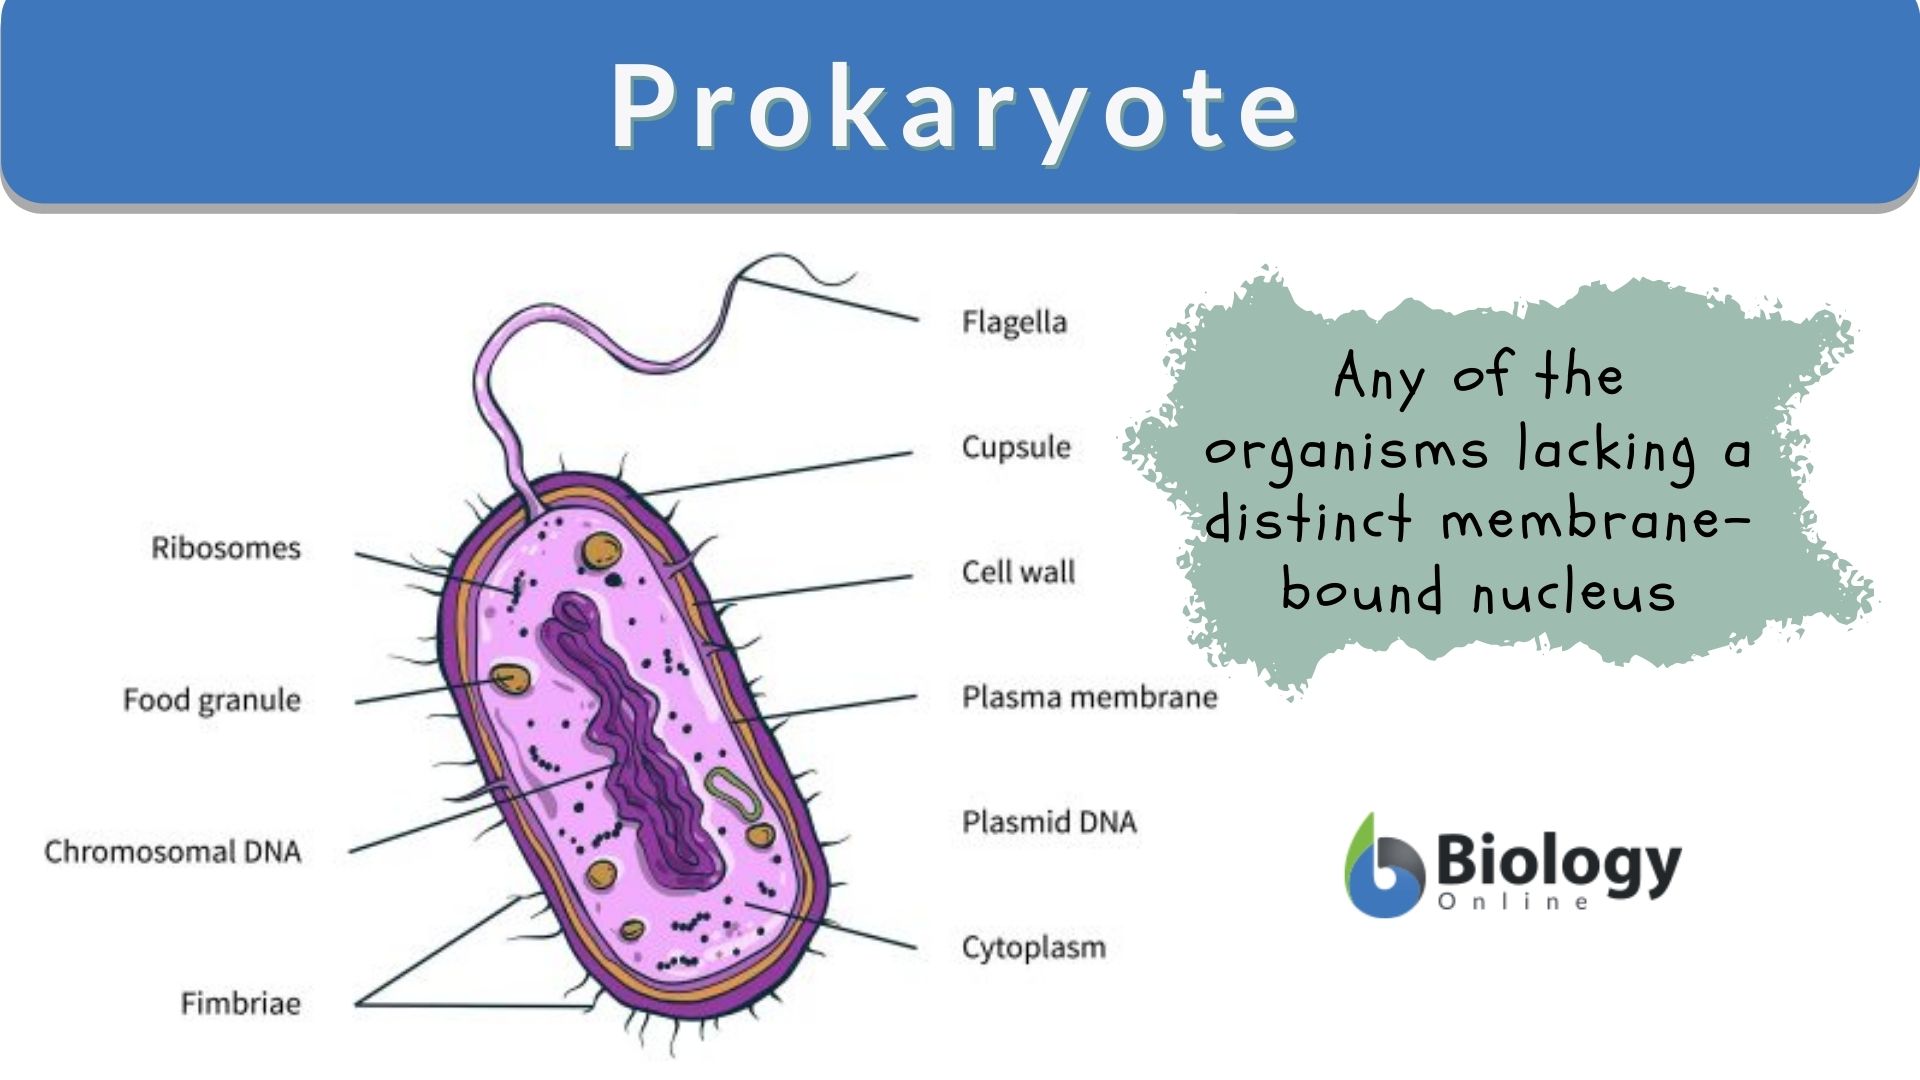 Prokaryote Definition and Examples - Biology Online Dictionary